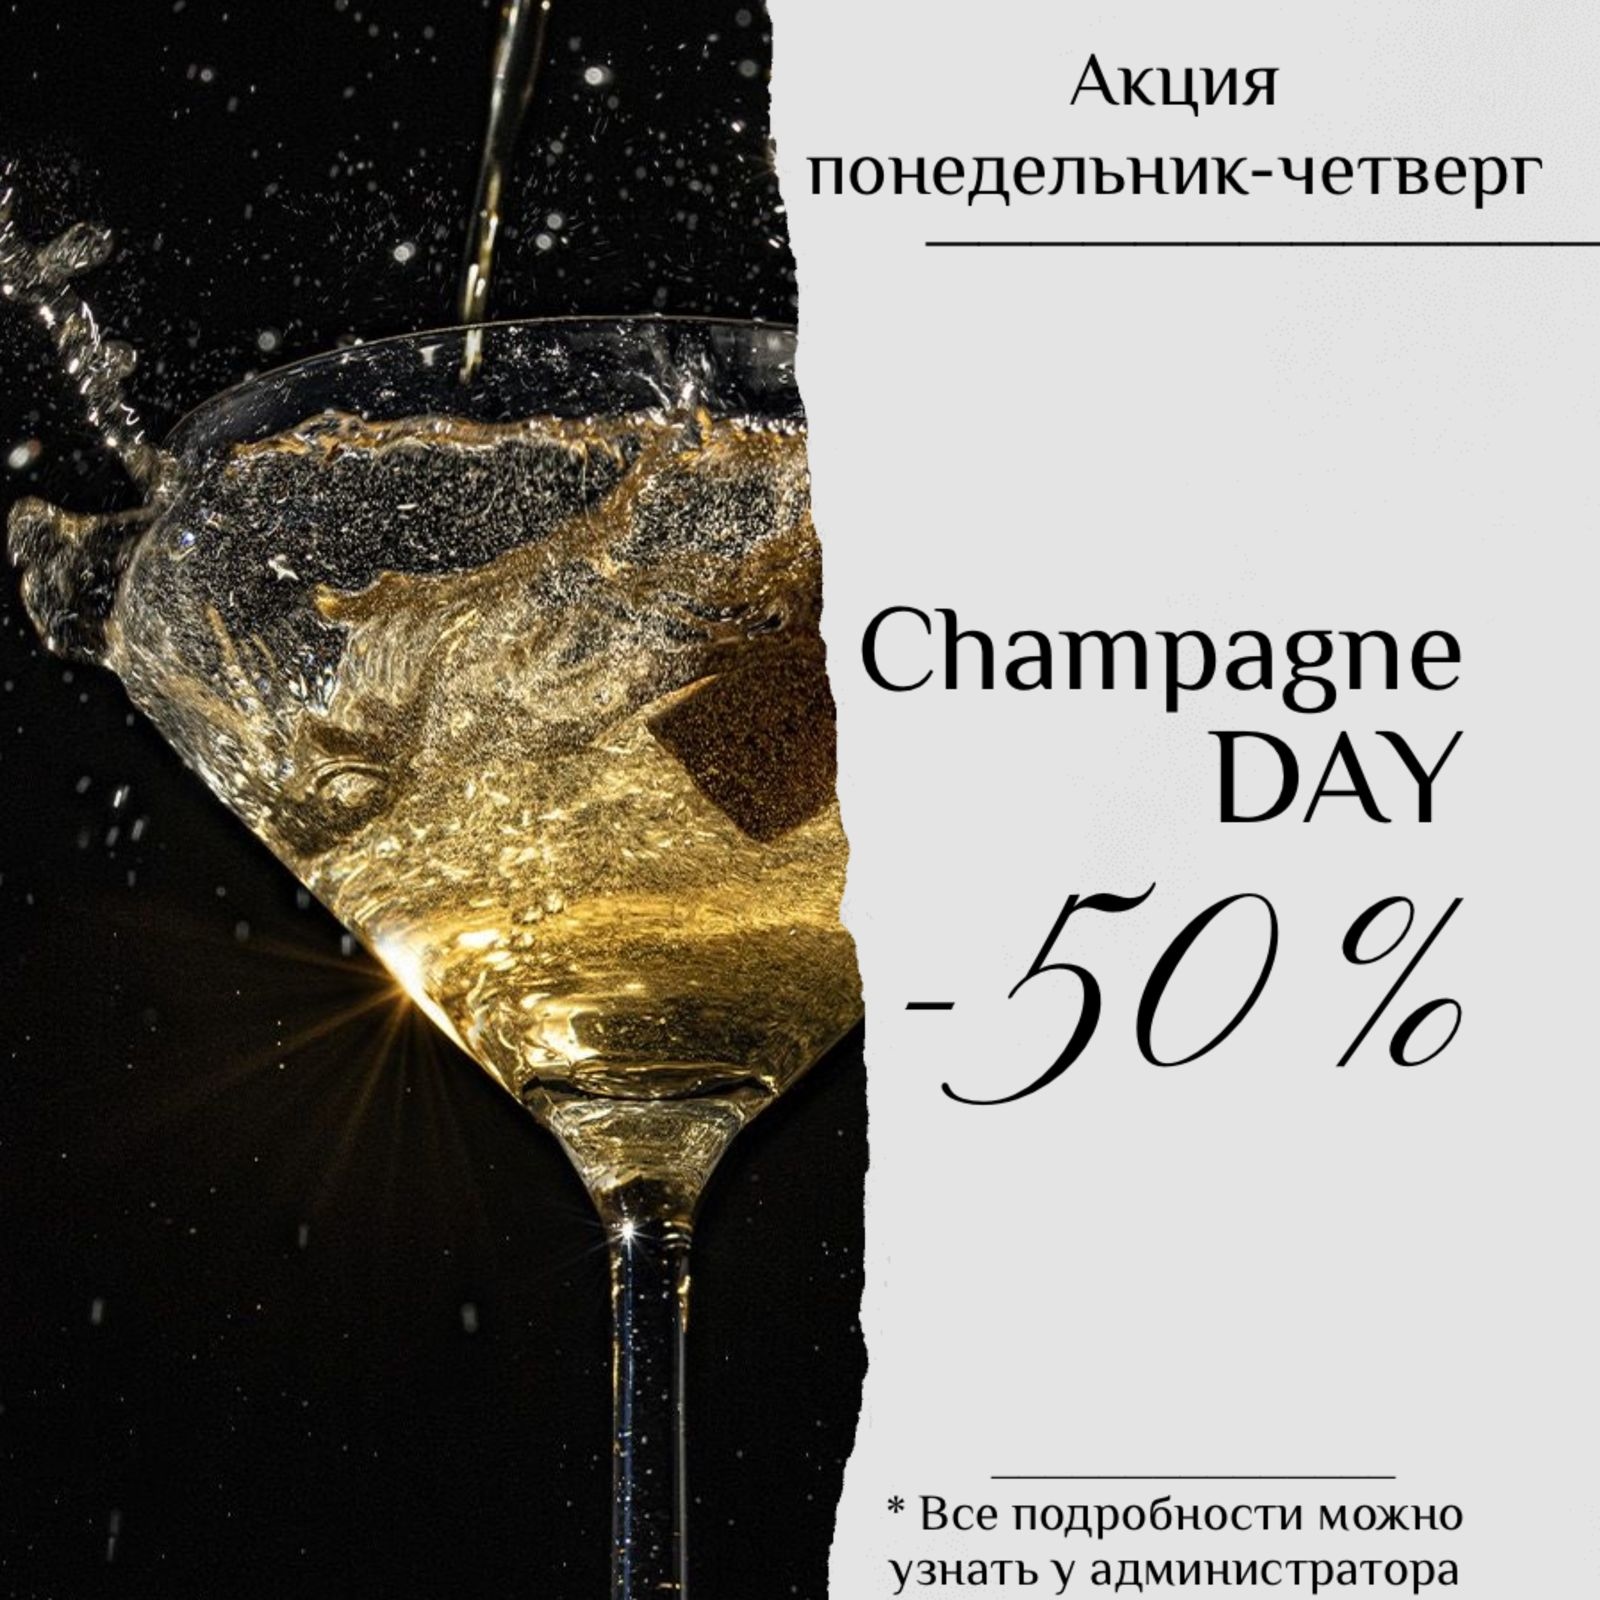 Champagne DAY